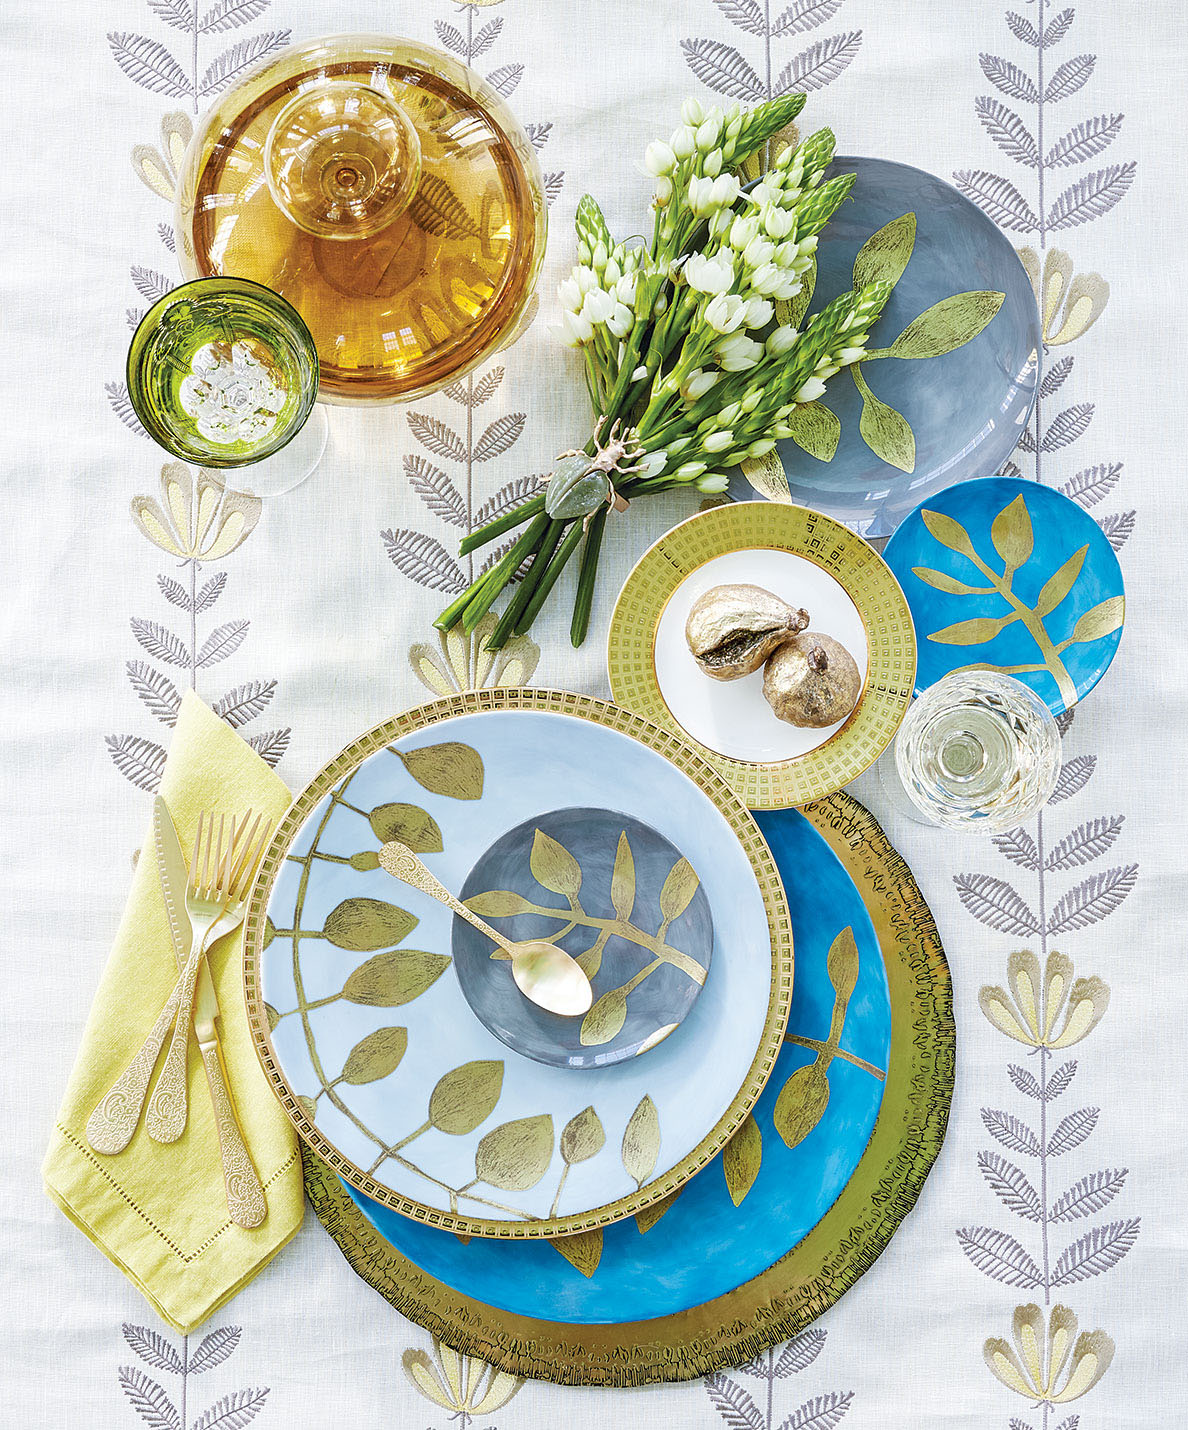 Tablescape with calming repetition of eaves, on both the china and the tablecloth, and a burst of blues and yellow-gold